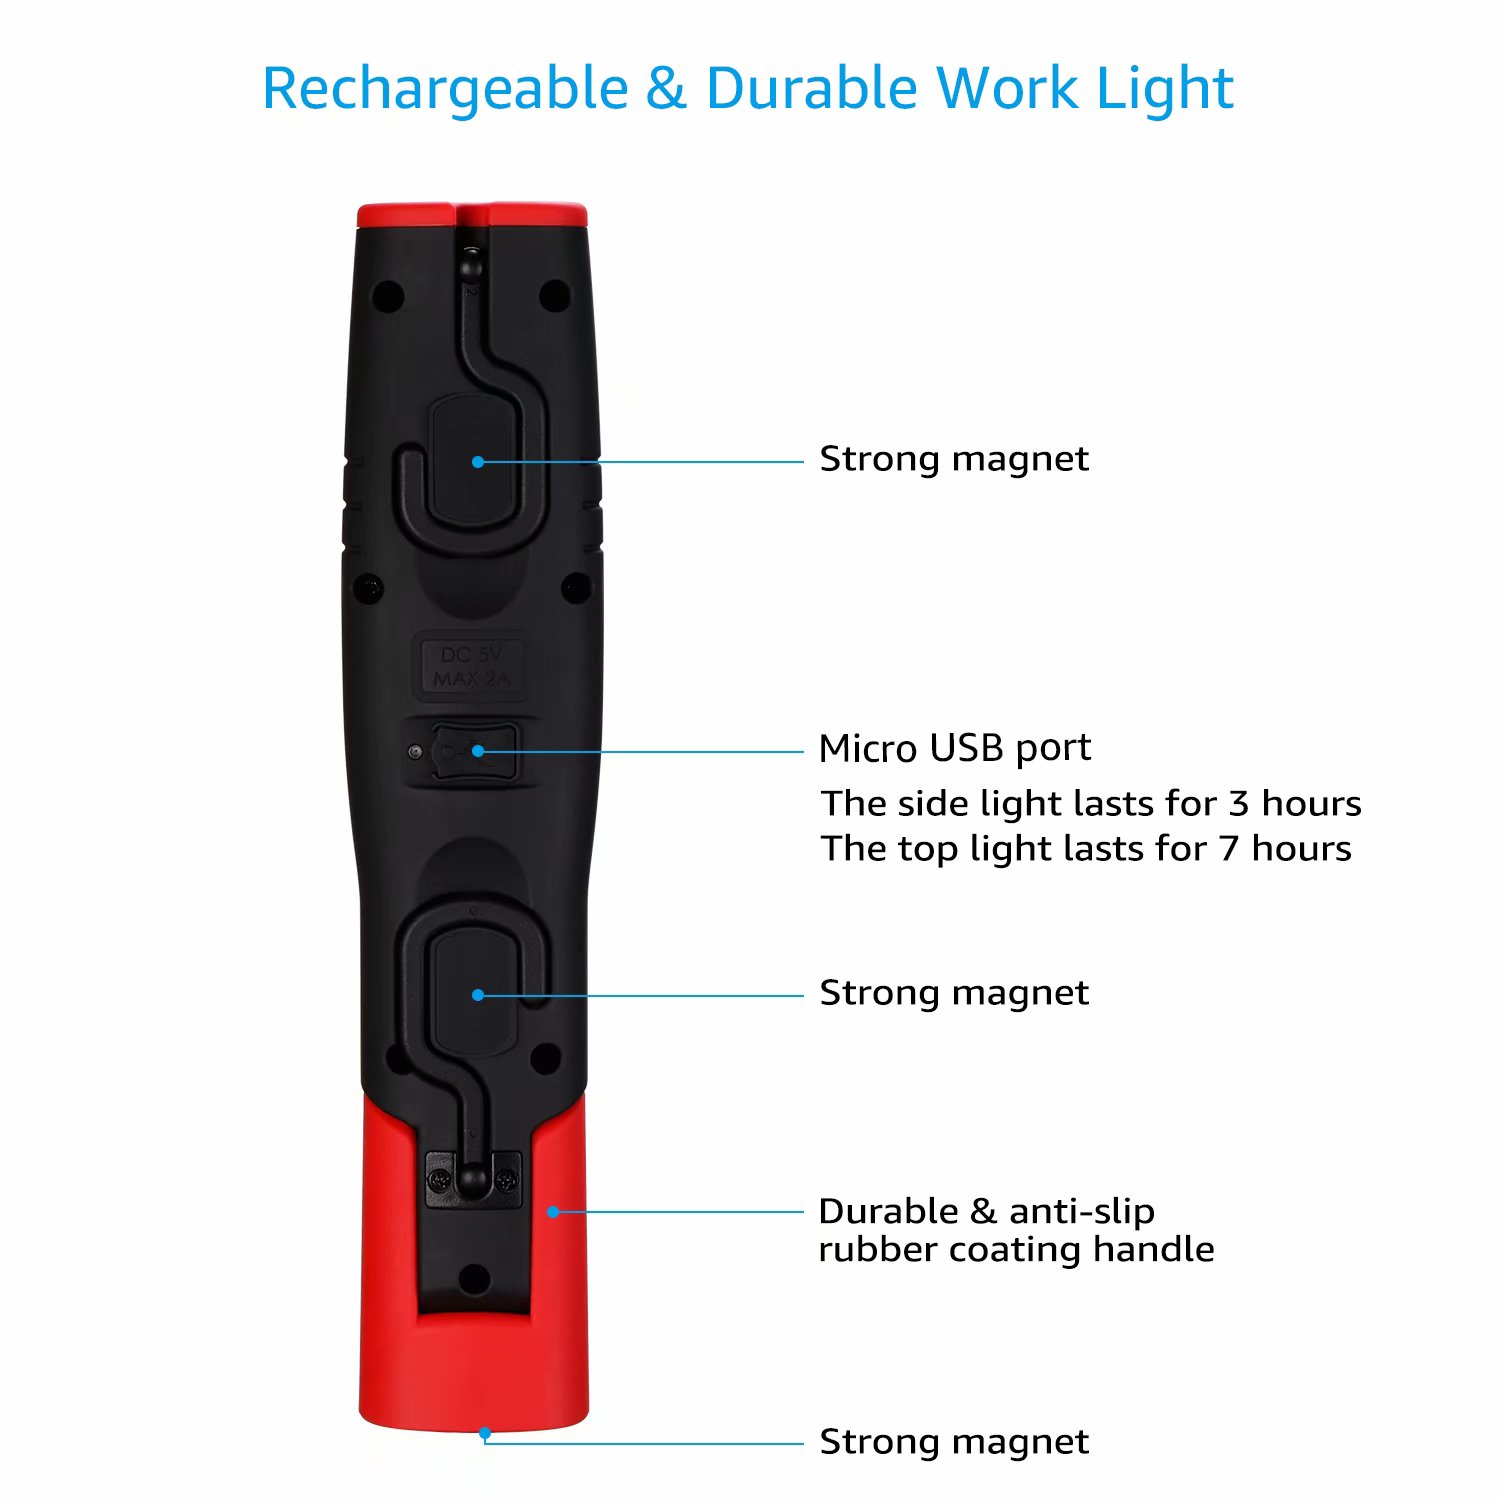 TORCHSTAR Rechargeable LED Work Light, UL-listed Power Supply, USB Charging  Port, Dual Magnetic Bases  360° Rotate Hanging Hooks, Handheld Flashlight,  for Camping, Car Repairing, Emergency Lighting